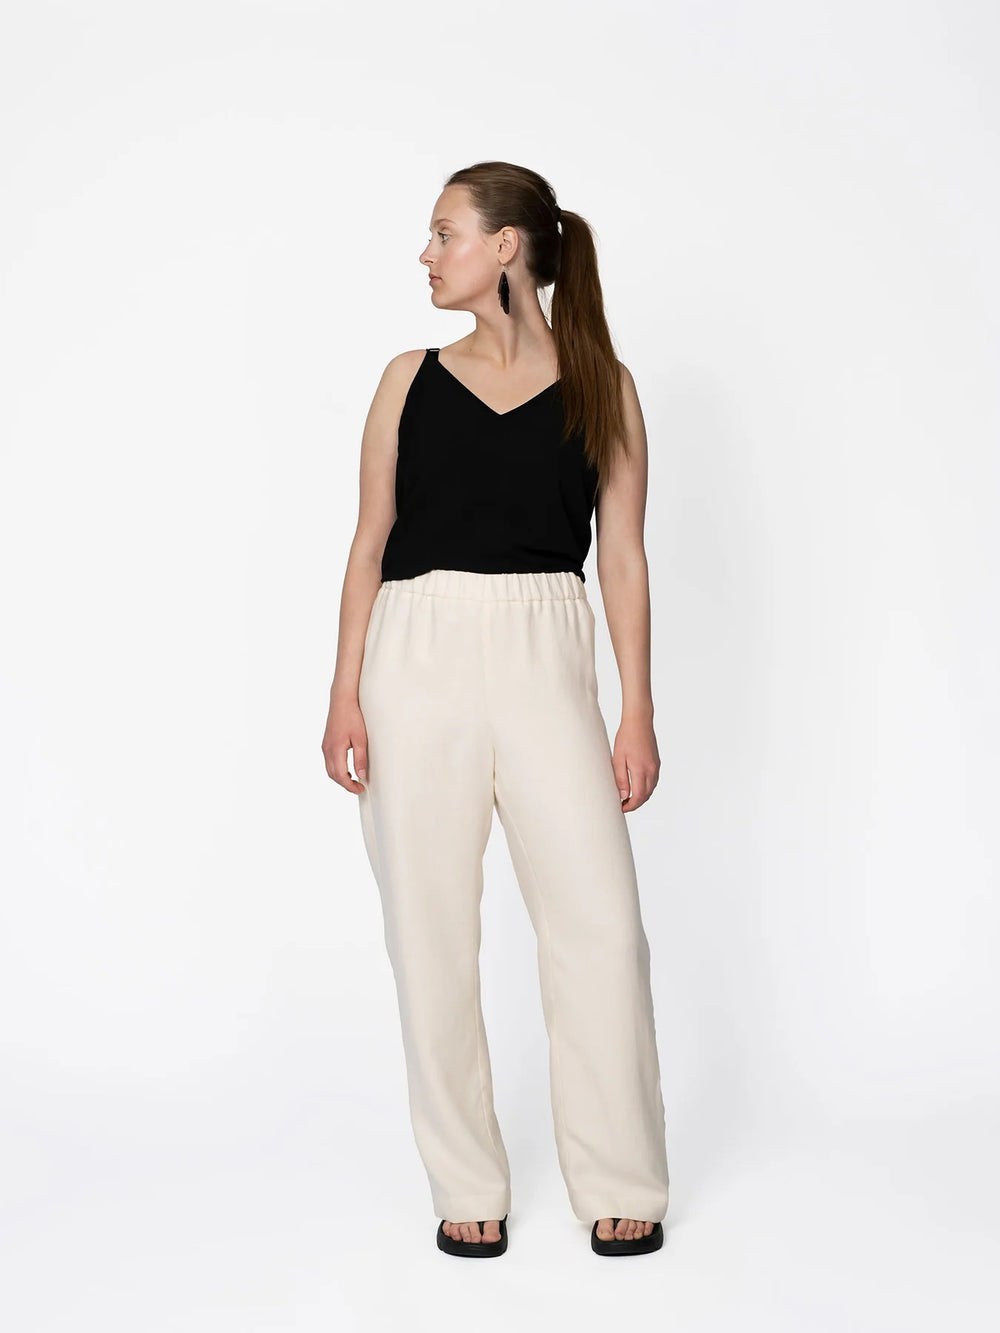 The Assembly Line Women's Pull-on Trousers